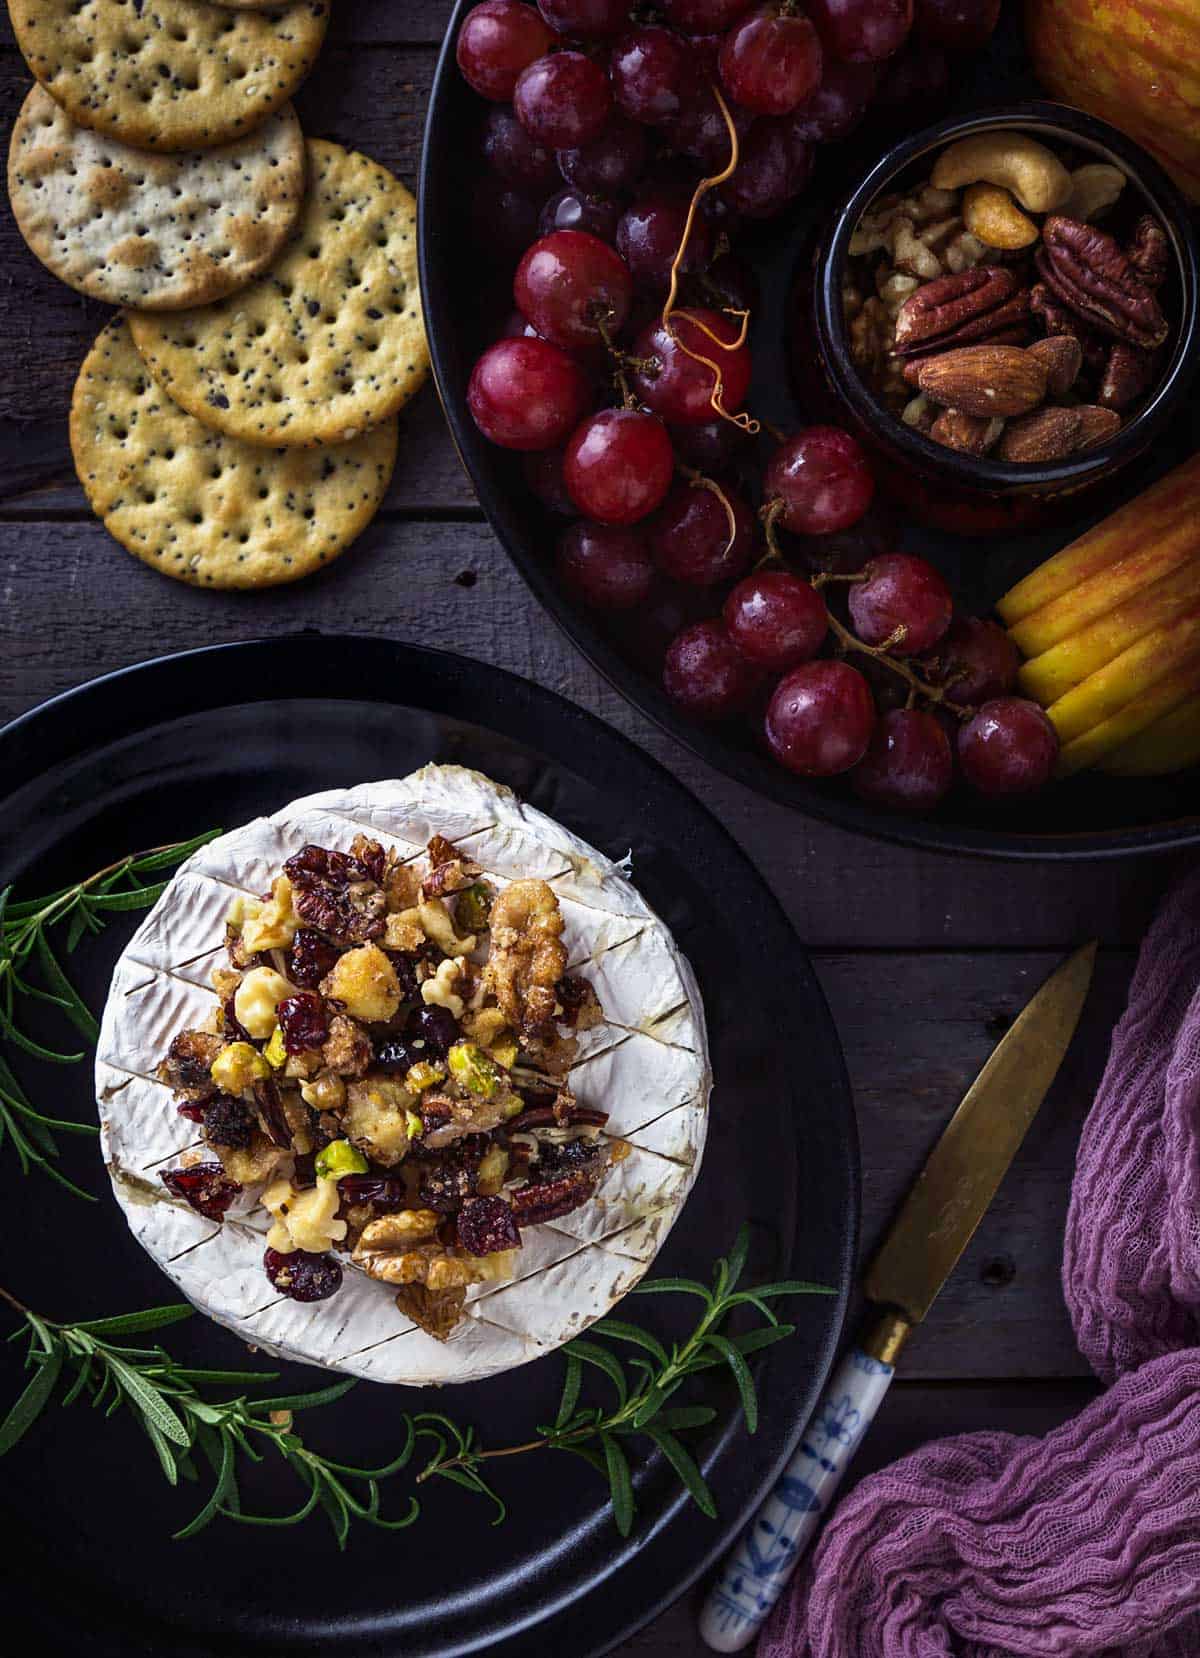 A wheel of baked brie with mixed nuts and cranberry topping on a table with fruit and crackers.